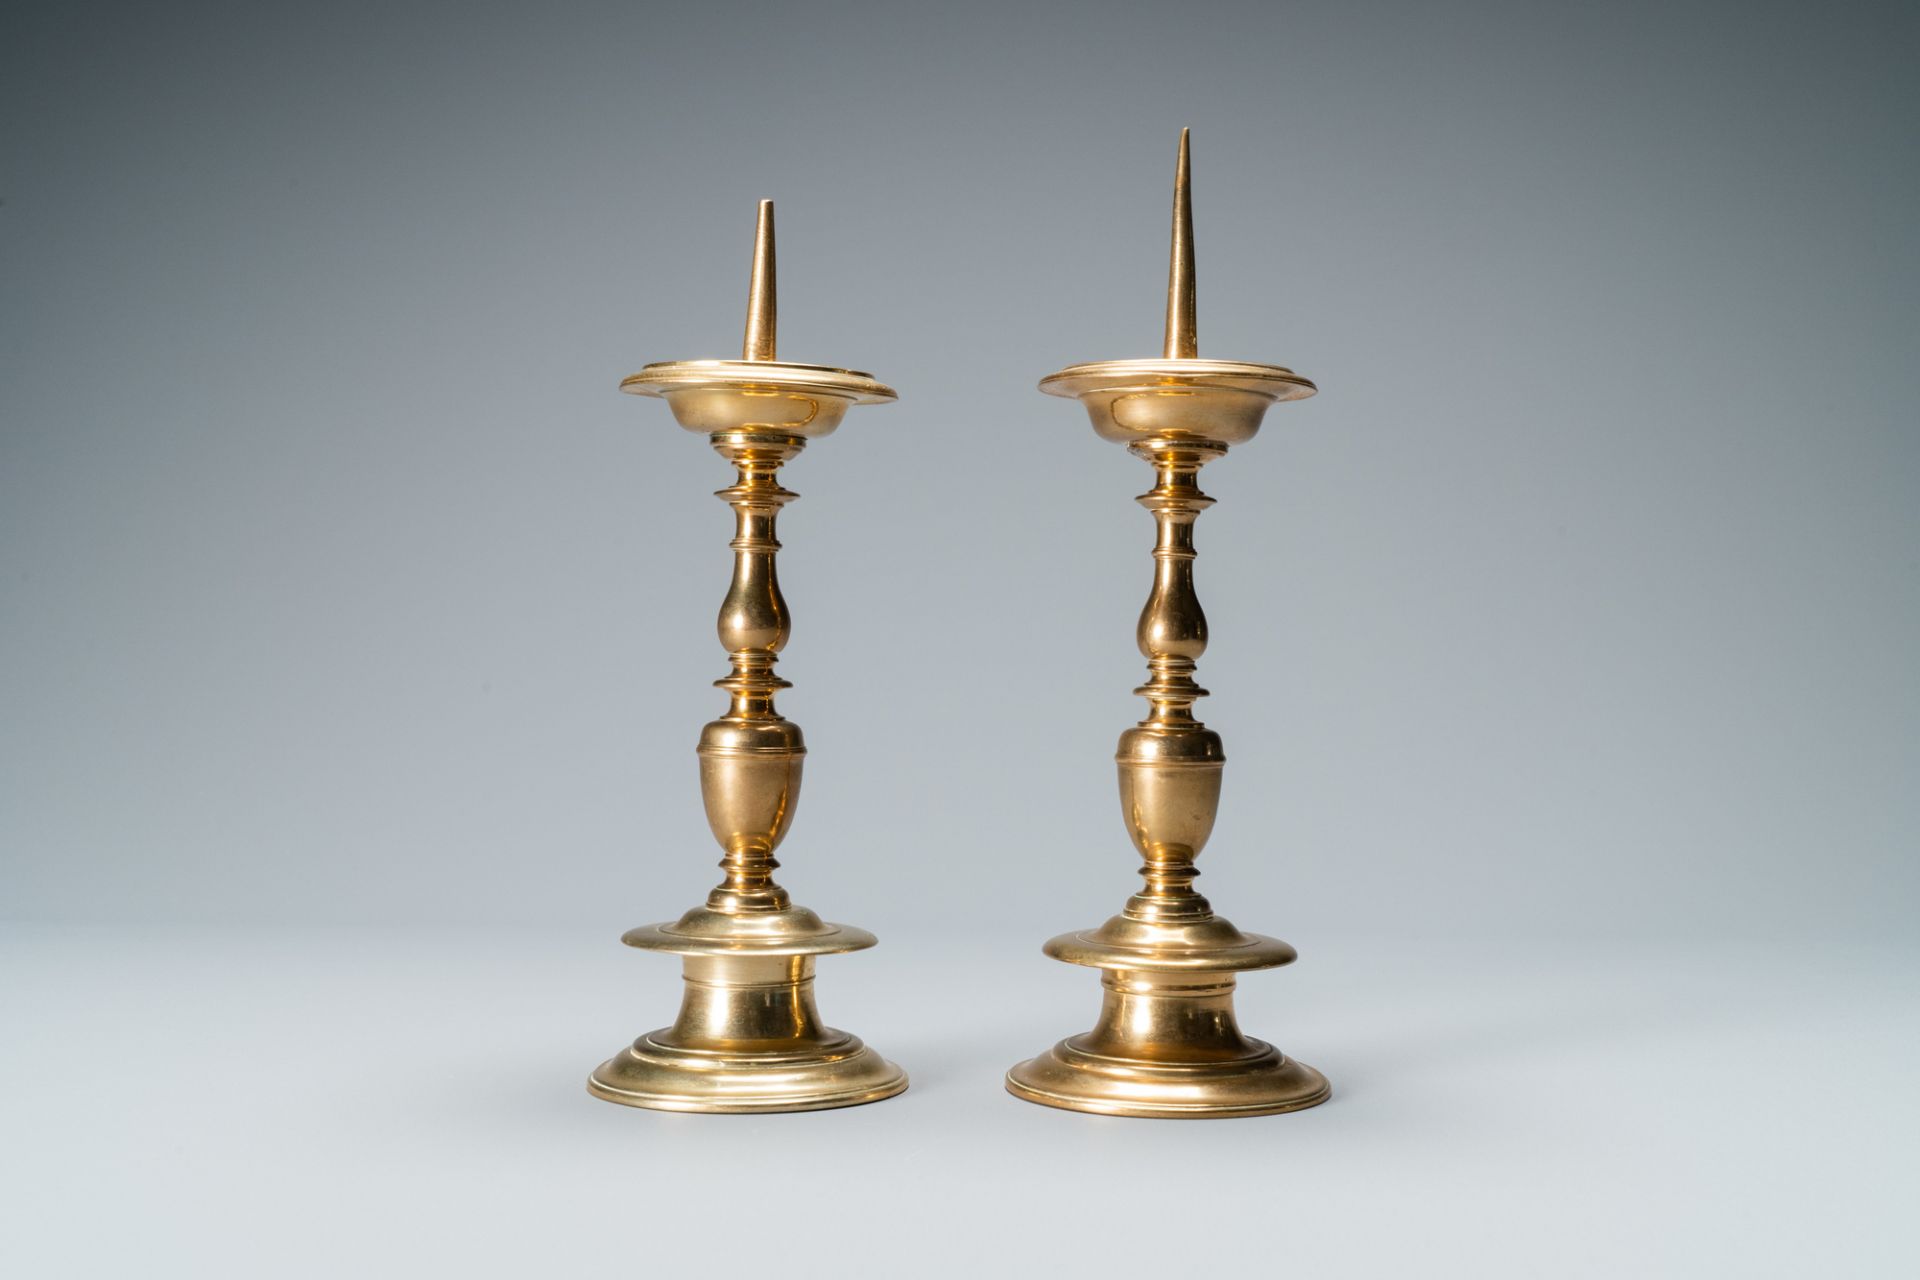 A pair of brass alloy candlesticks, Italy, 17th C. - Image 4 of 7